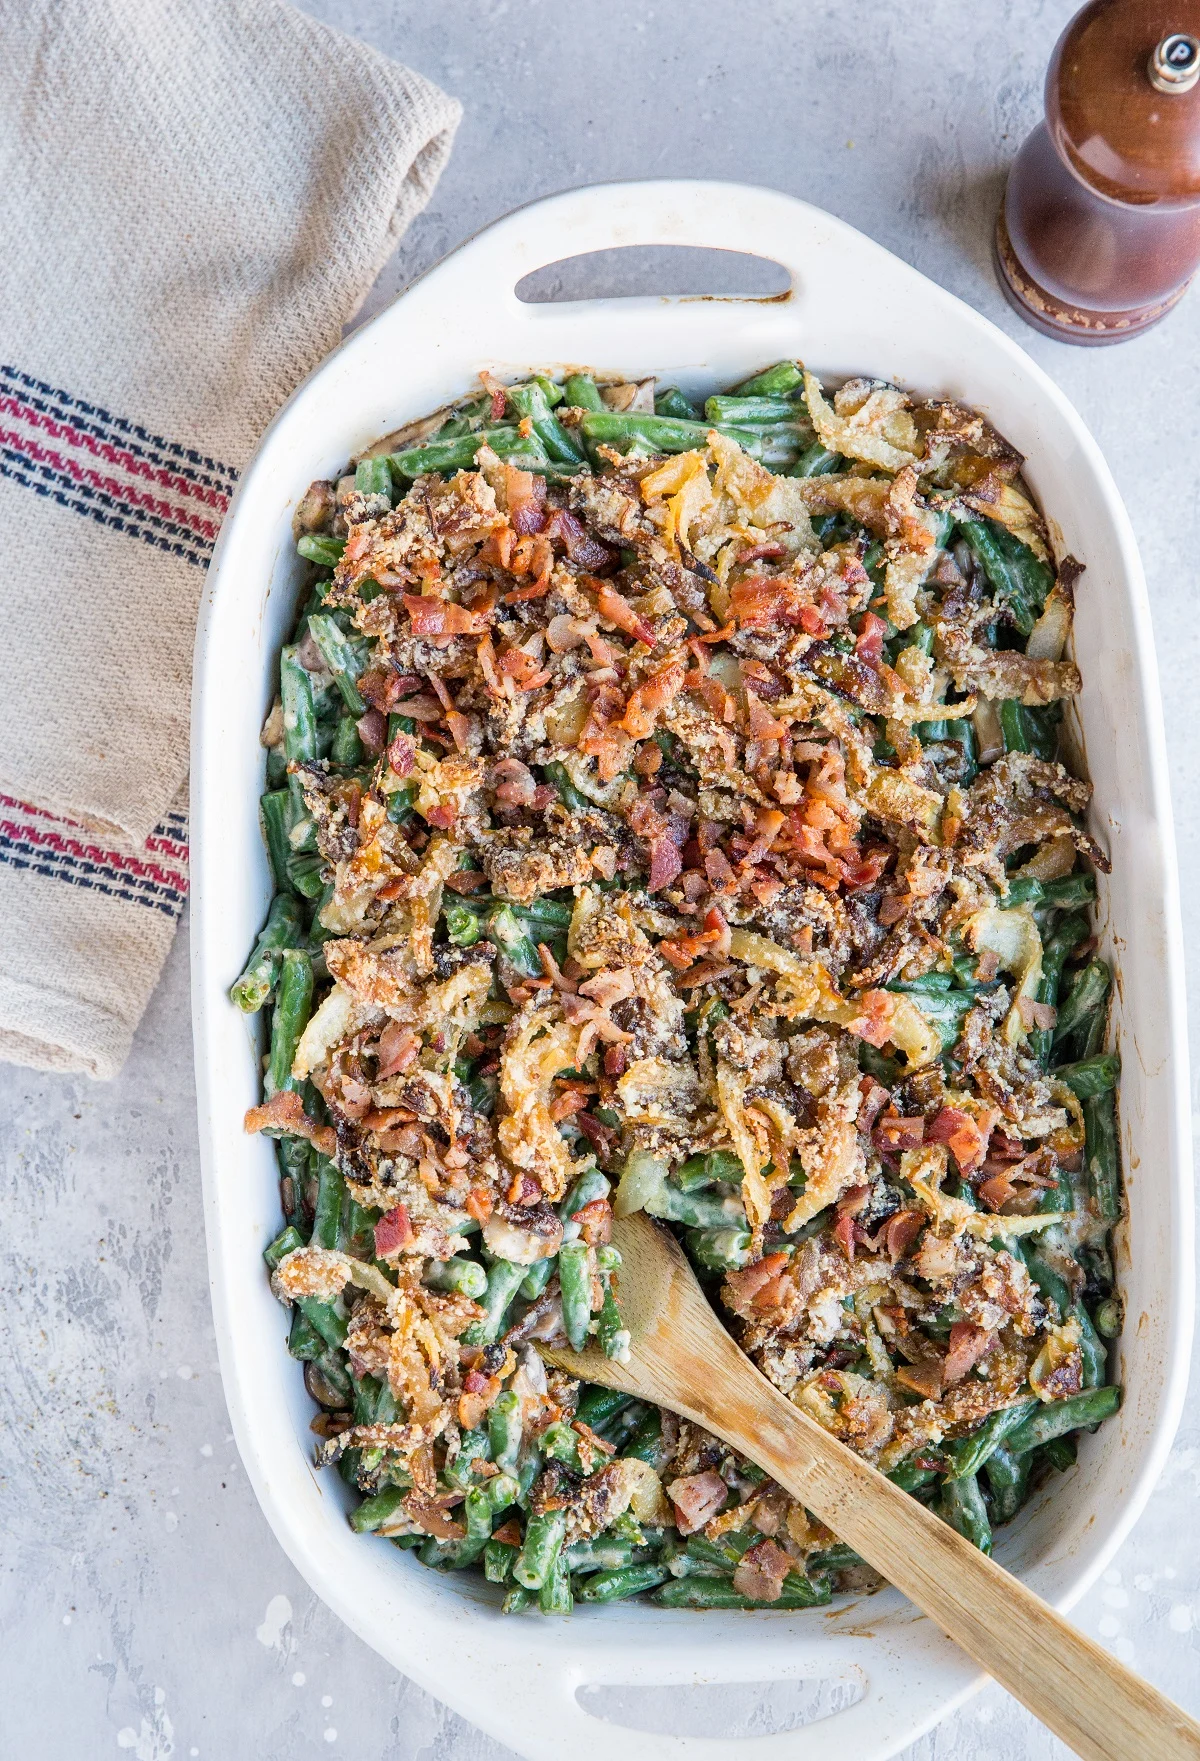 Low-Carb Green Bean Casserole - keto-friendly made dairy-free and gluten-free